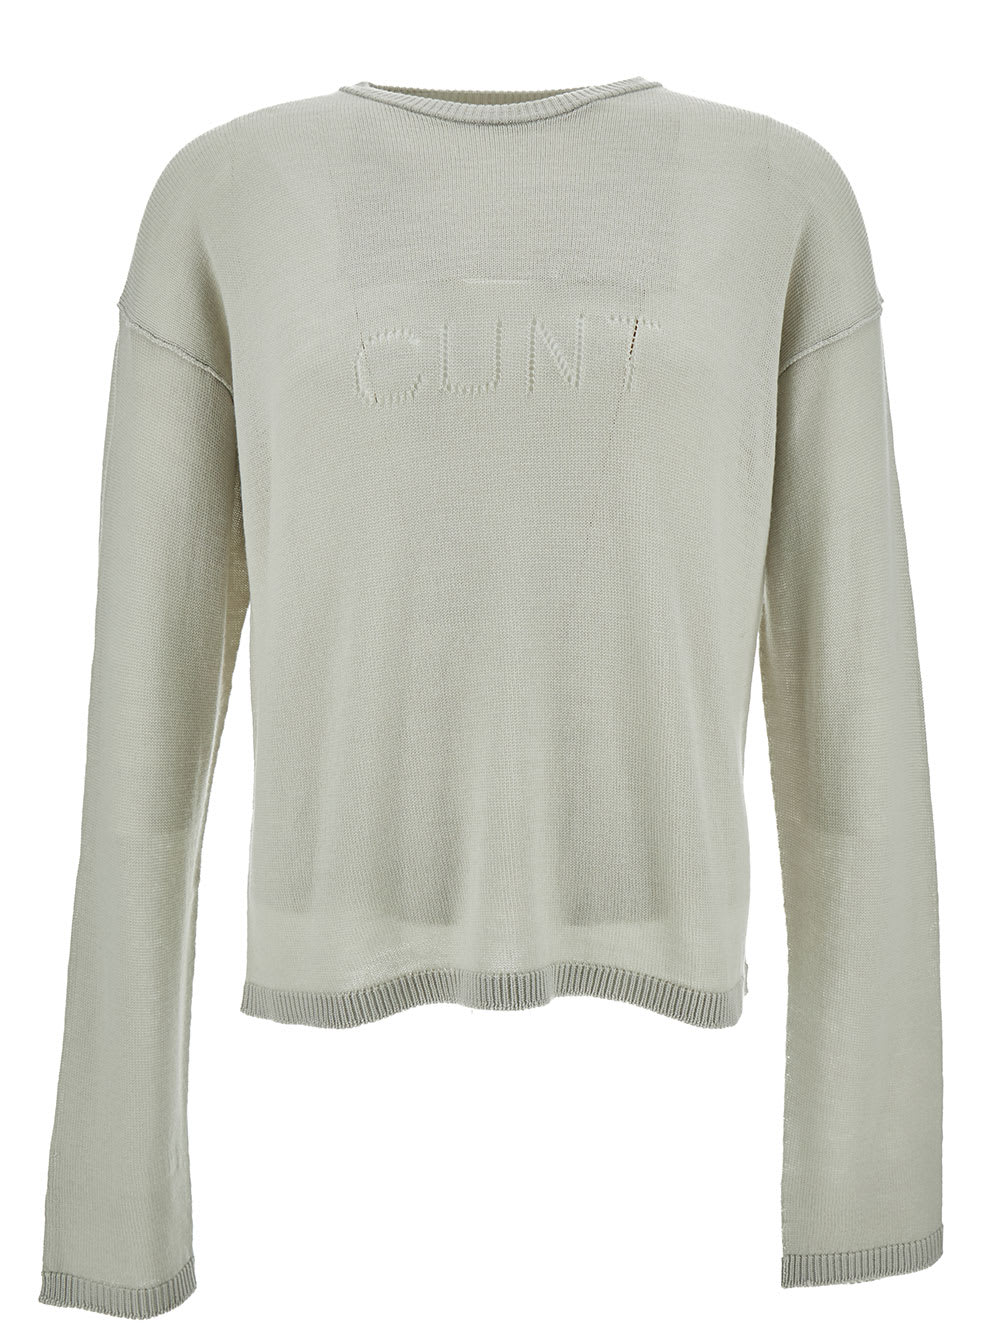 Grey Long Sleeve Top With Cunt Writing In Wool Man